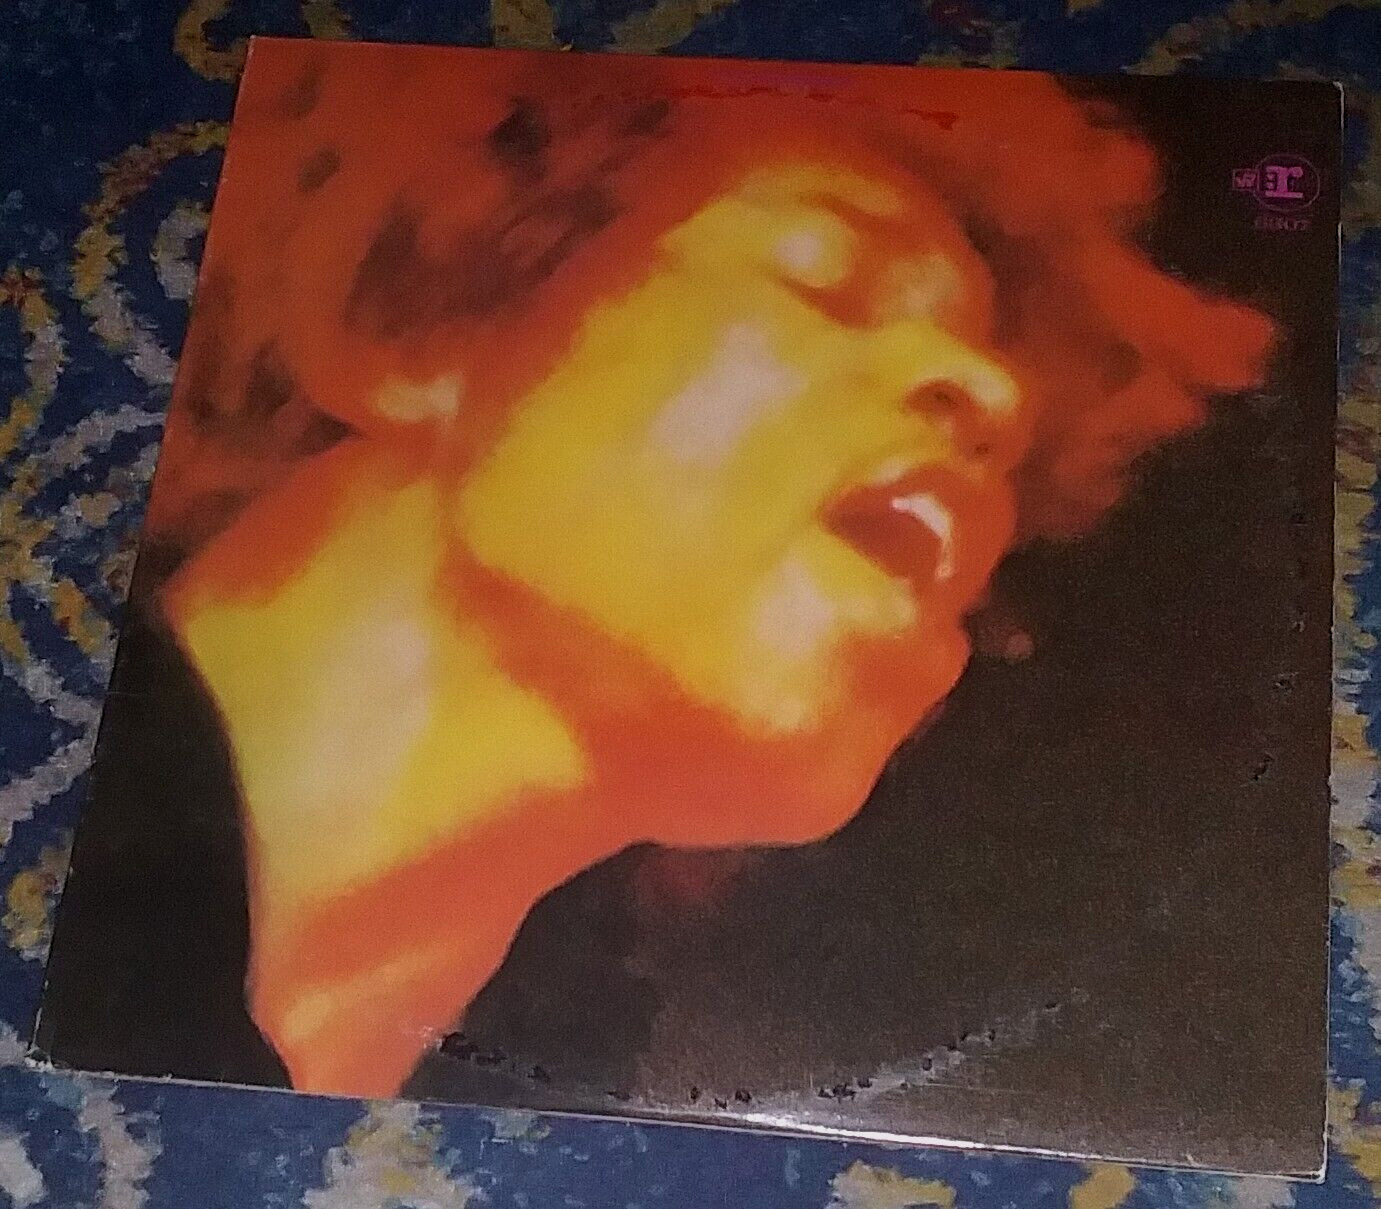 ELECTRIC LADYLAND / THE JIMI HENDRIX EXPERIENCE 1968 REPRISE 2XLP RS 6307